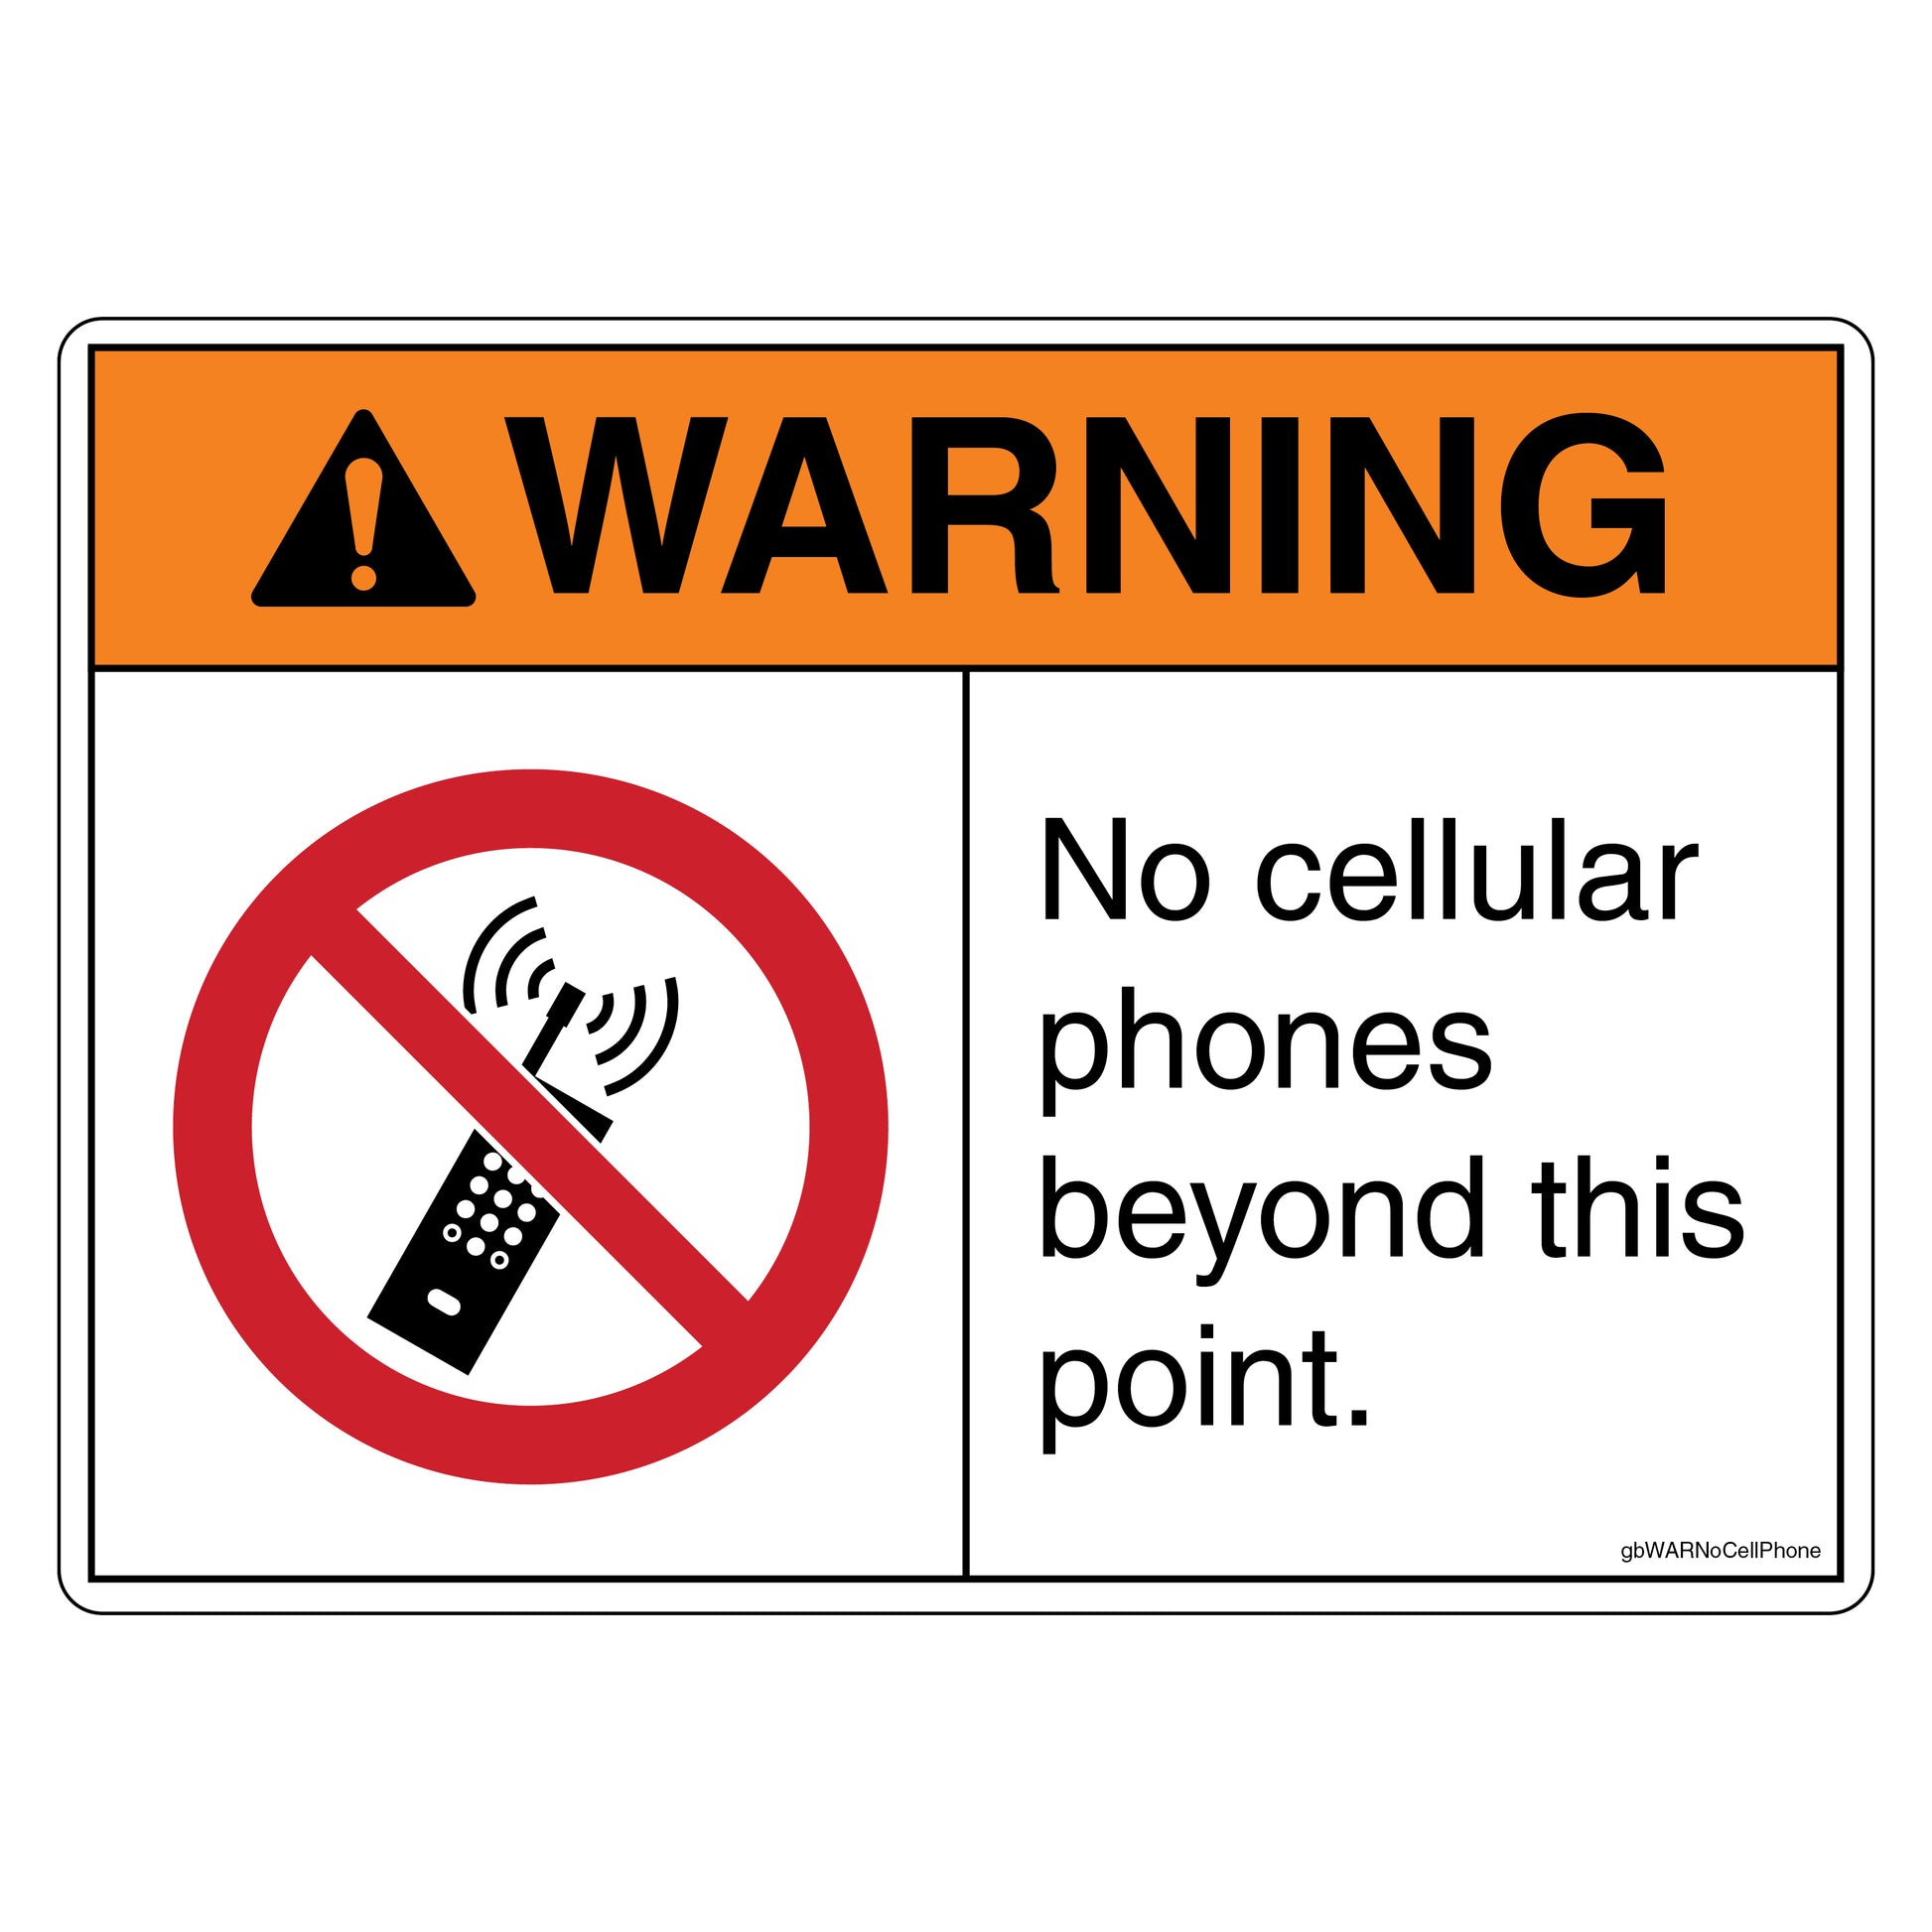 Warning No Cellular Phones Beyond This Point Decal. 4 inches by 3 inches in size.